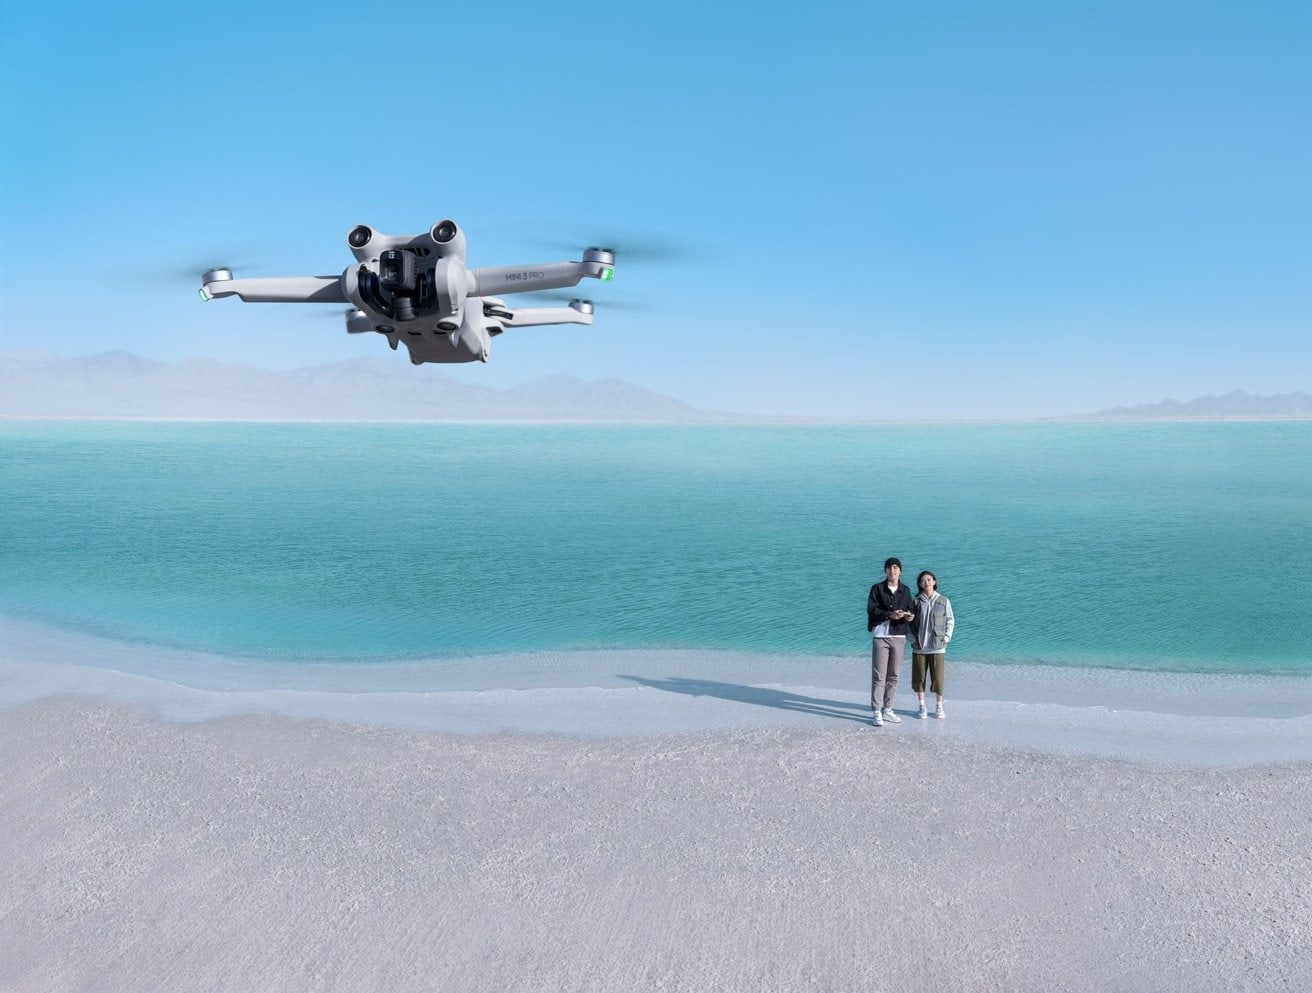 The DJI Mini Pro 3 can fly for 34 minutes on a standard charge.